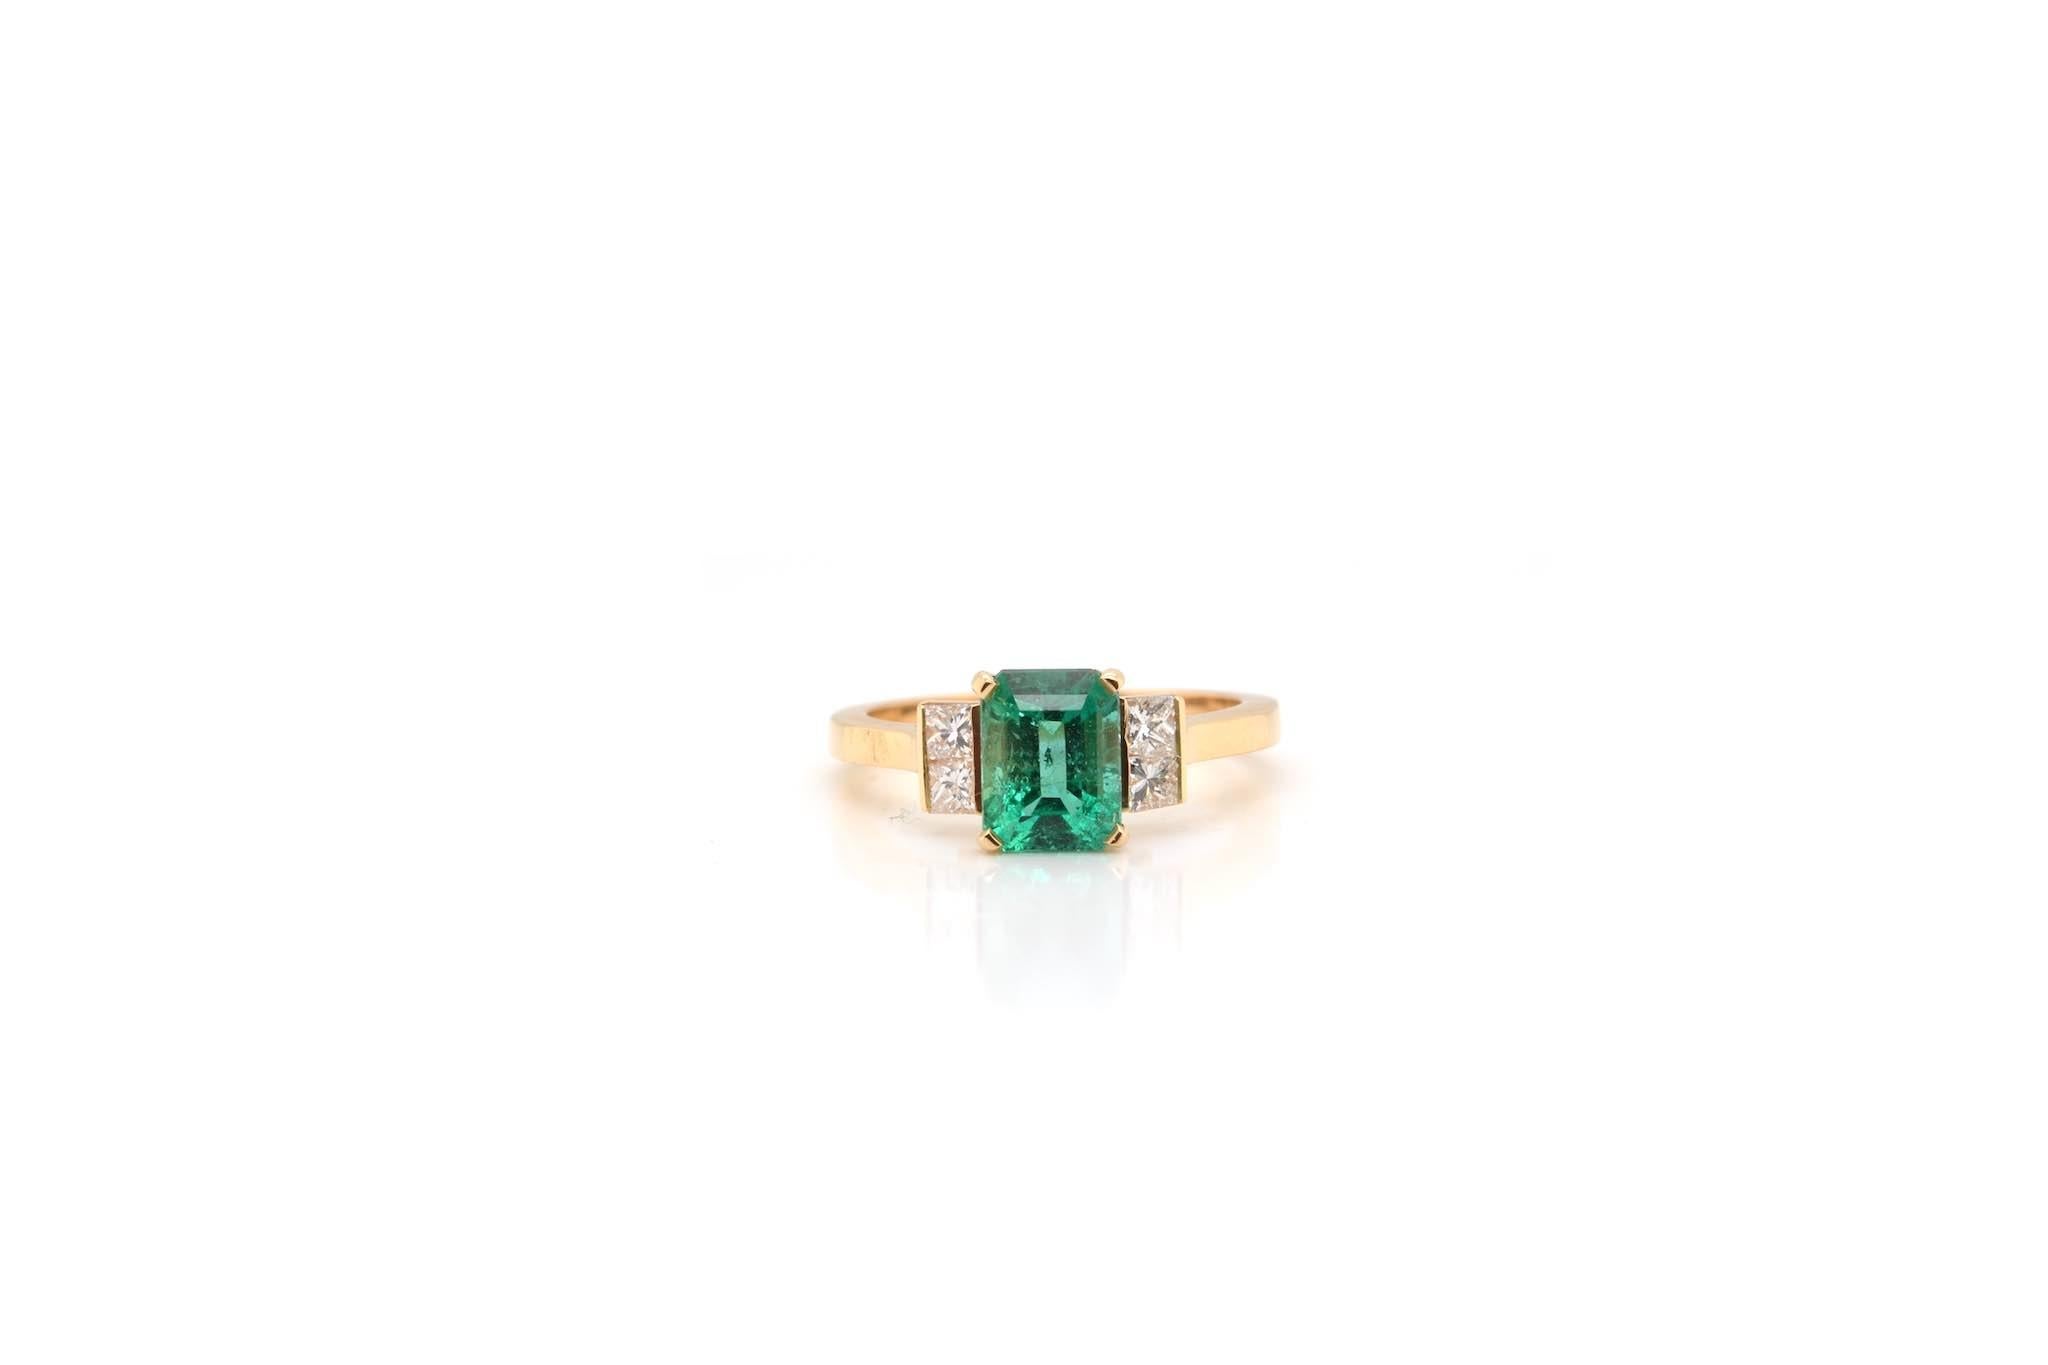 Stones: 1.36 carat emerald and diamonds
princess cuts for a total weight of 0.36 carats.
Material: 18k yellow gold
Dimensions: 7 mm length on finger
Weight: 3.6g
Size: 52.5 (free sizing)
Certificate
Ref. : 24767 / 24849